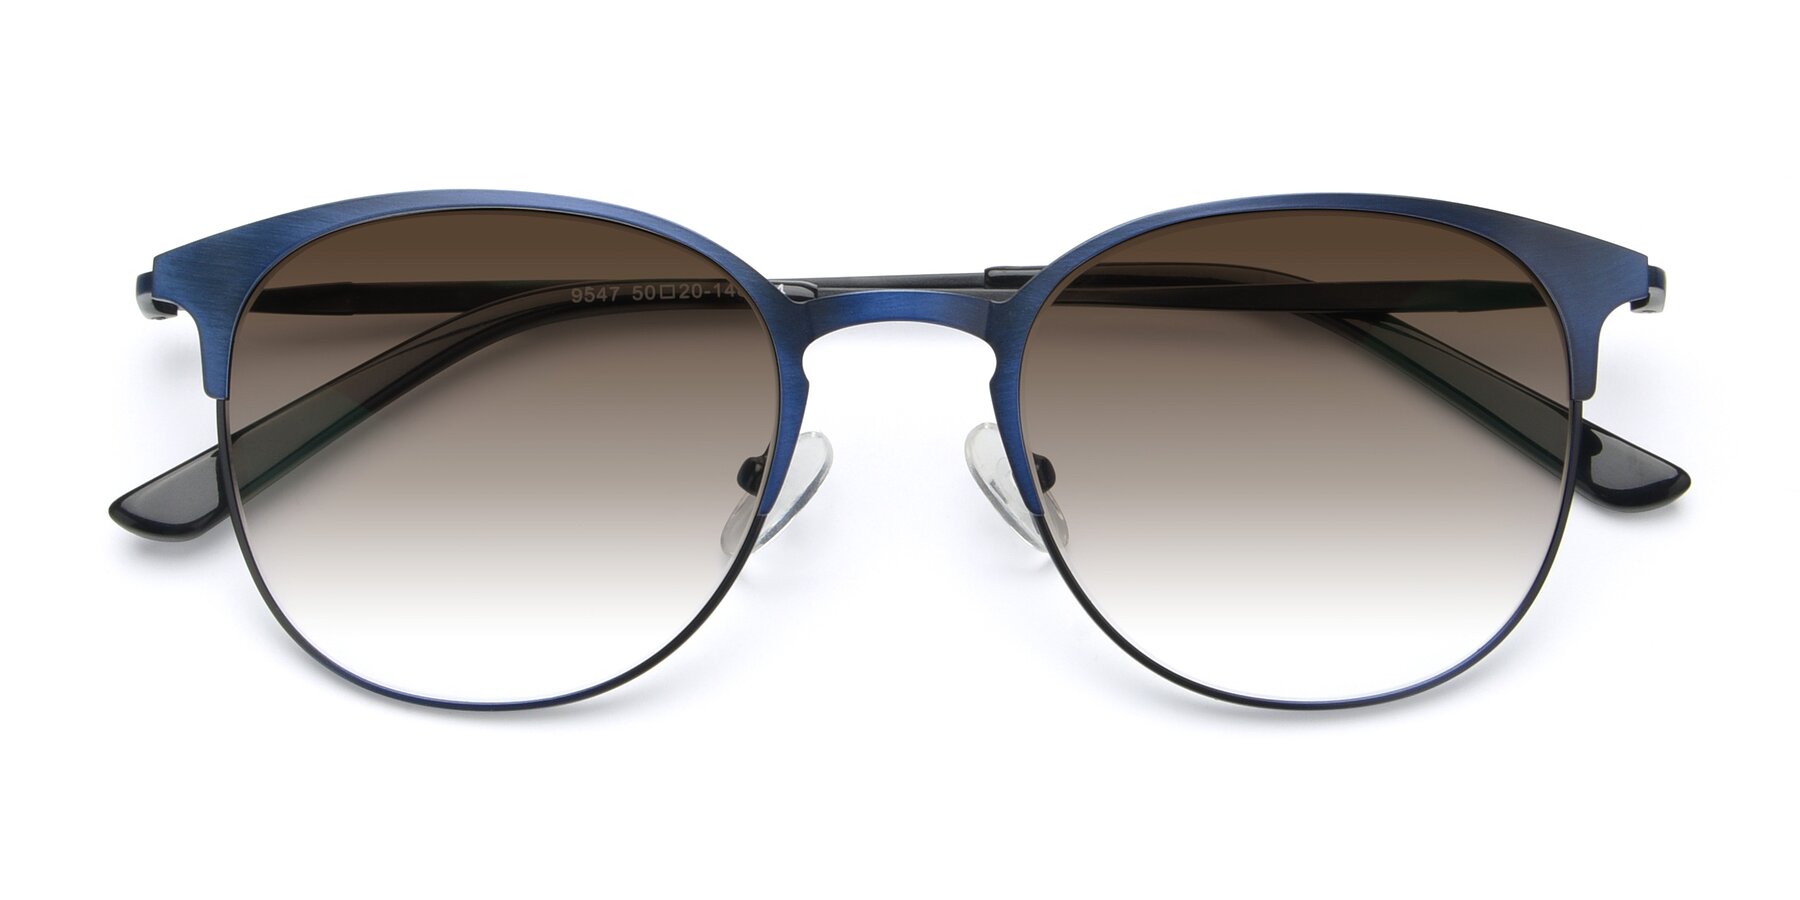 View of 9547 in Antique Blue with Brown Gradient Lenses